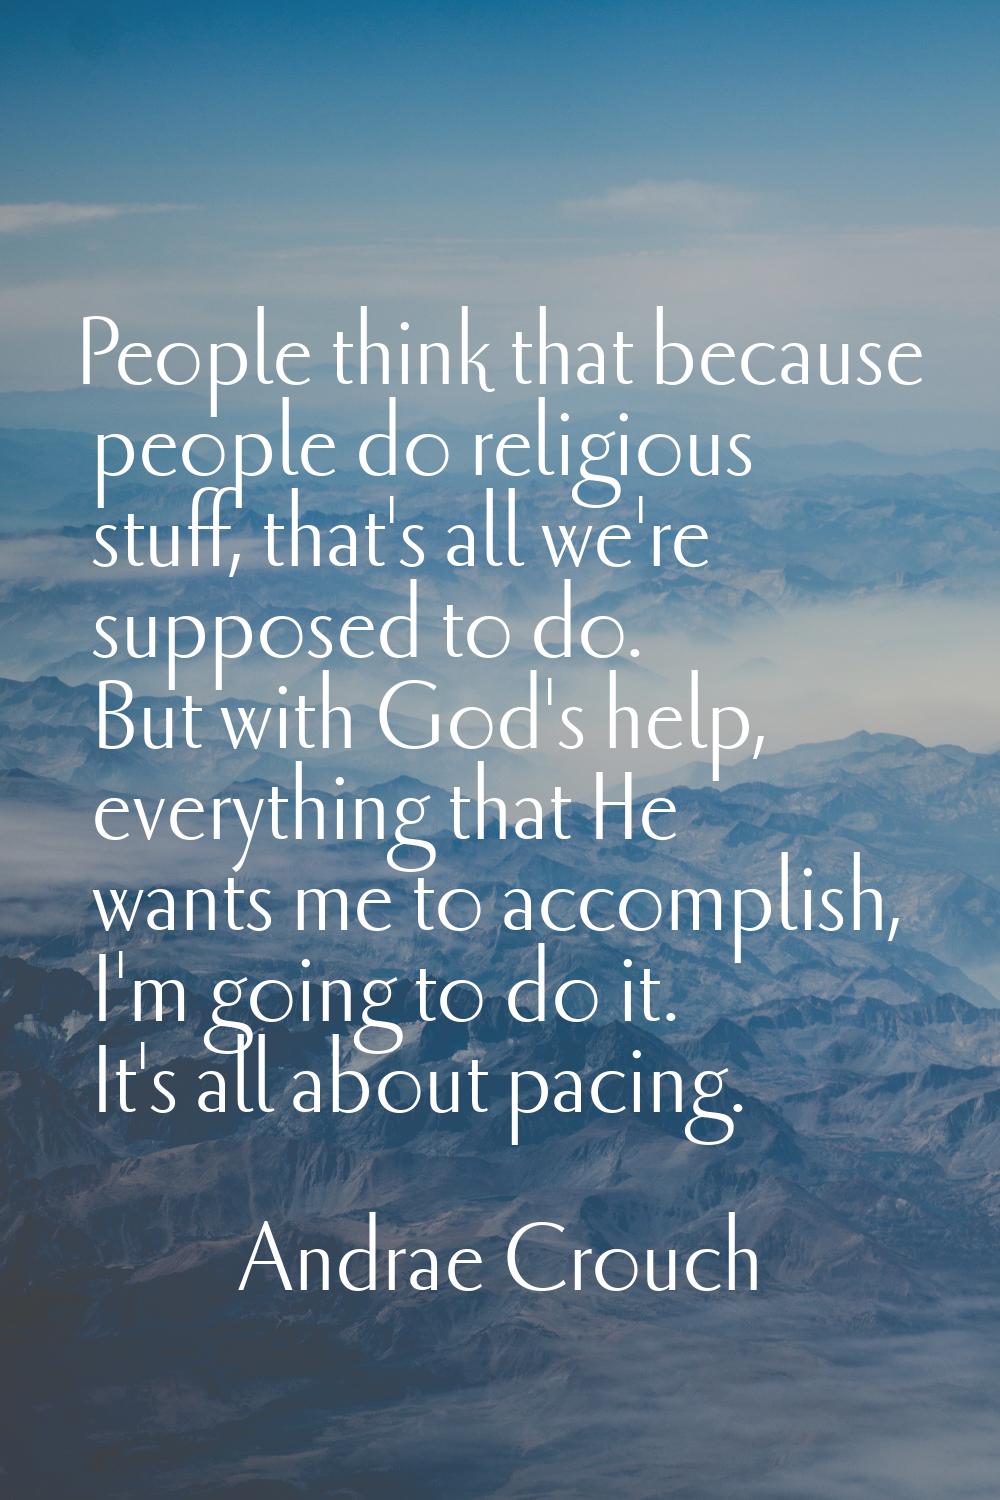 People think that because people do religious stuff, that's all we're supposed to do. But with God'